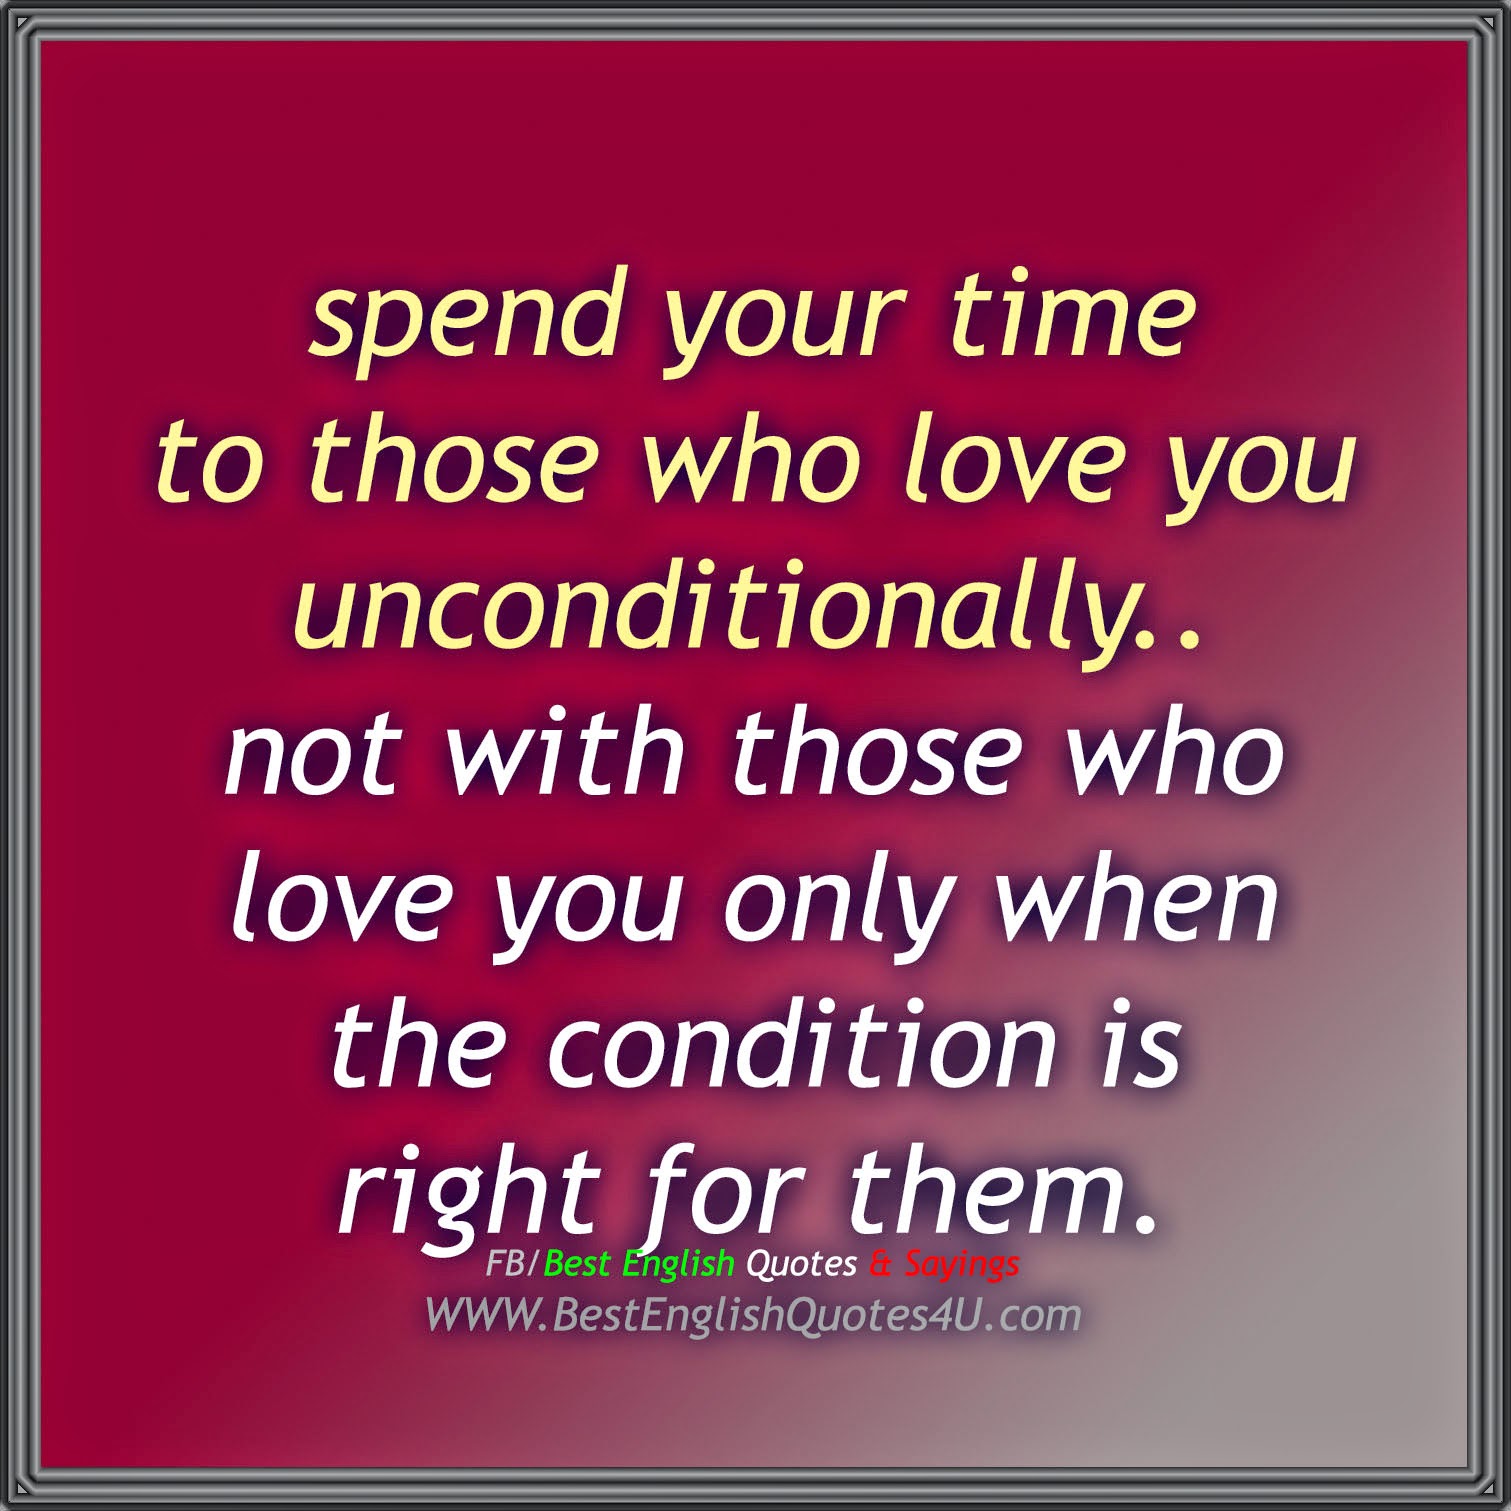 spend your time to those who love you unconditionally not with those who love you only when the condition is right for them